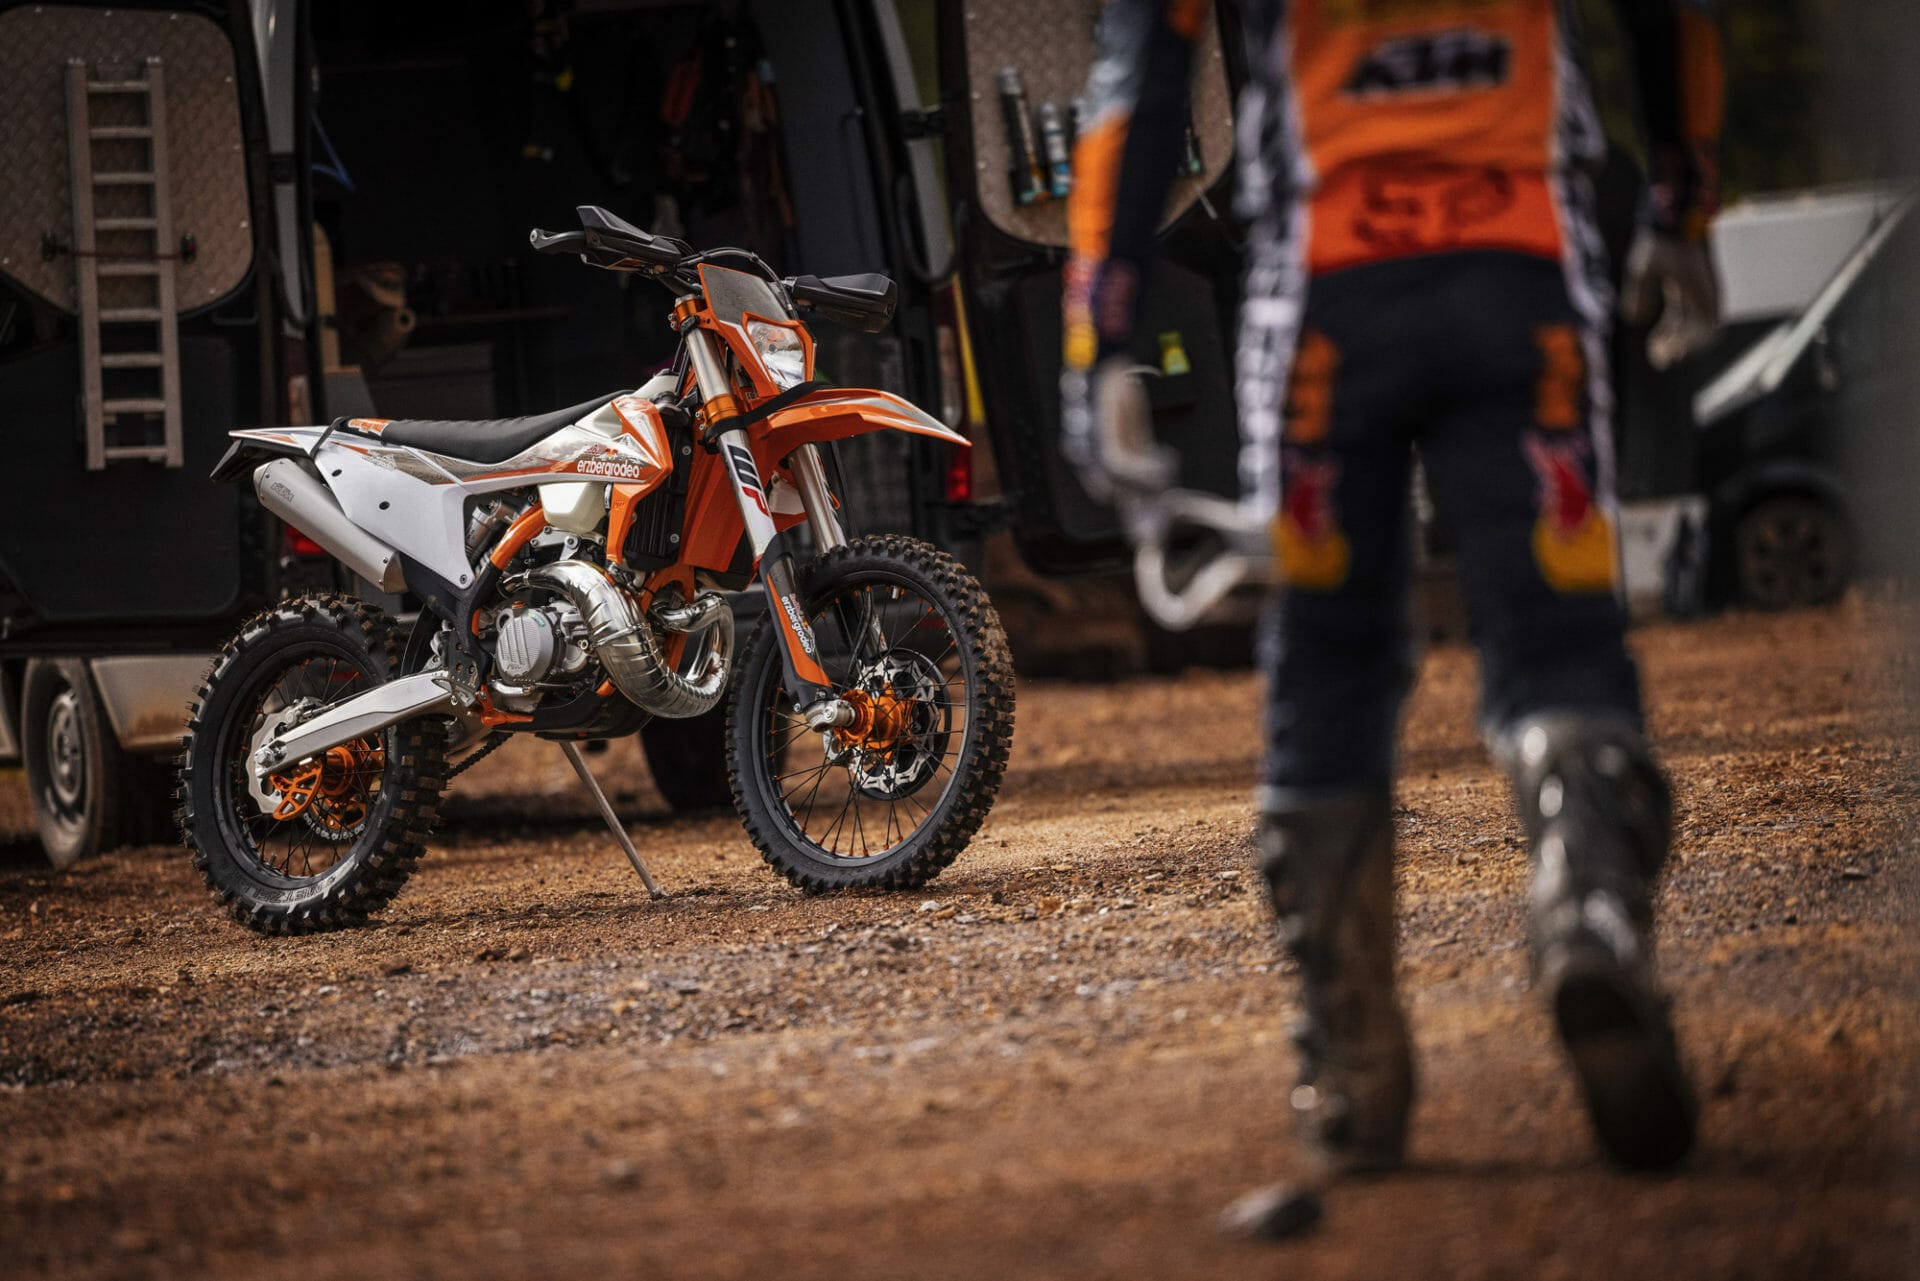 KTM 300 EXC TPI Erzbergrodeo 2022
- also in the MOTORCYCLES.NEWS APP